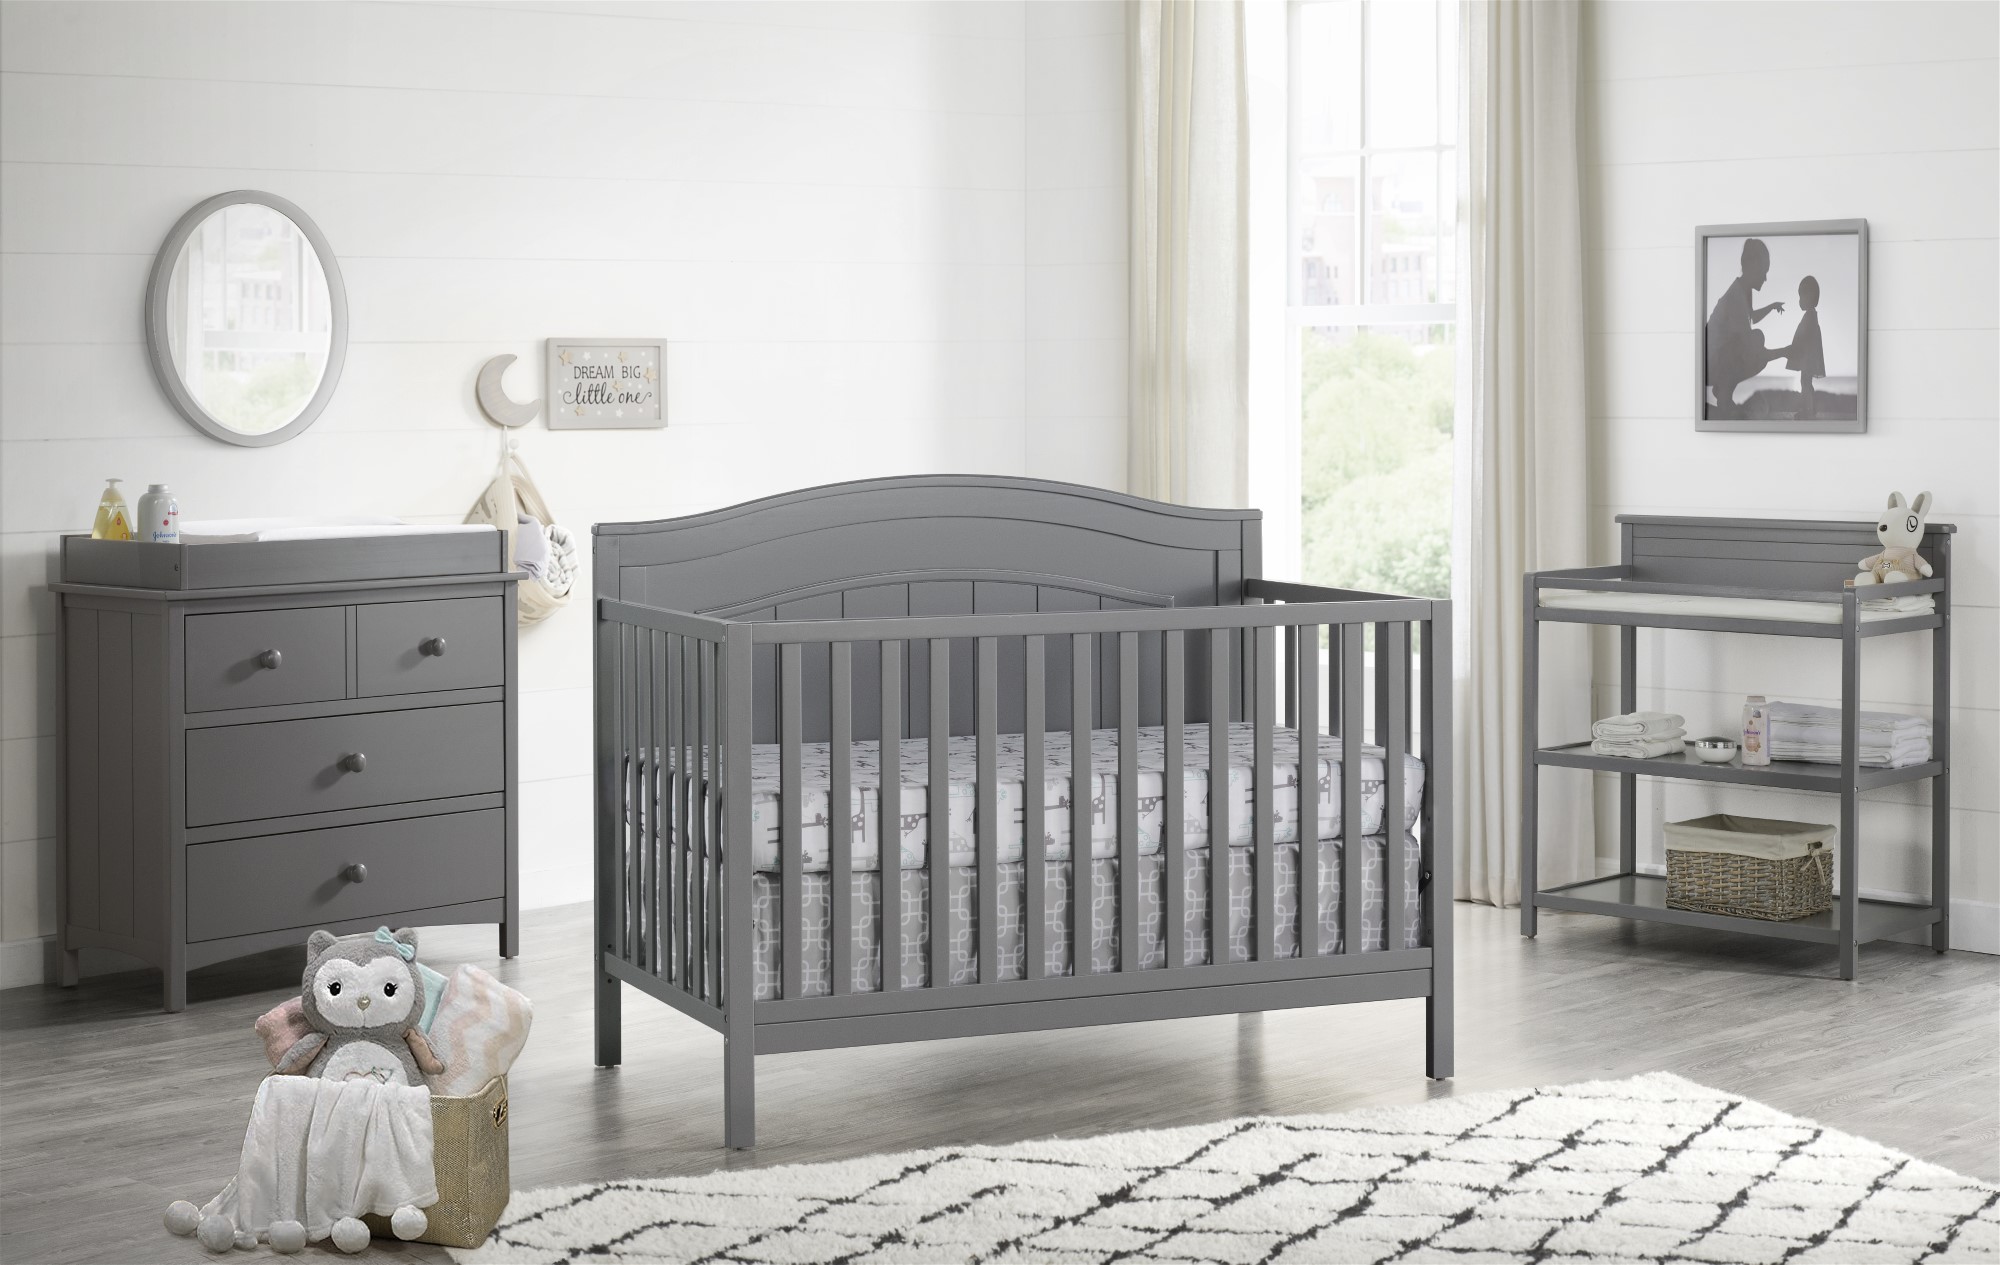 Oxford Baby North Bay 4-in-1 Convertible Crib, Dove Gray, GREENGUARD Gold Certified, Wooden Crib - image 1 of 12